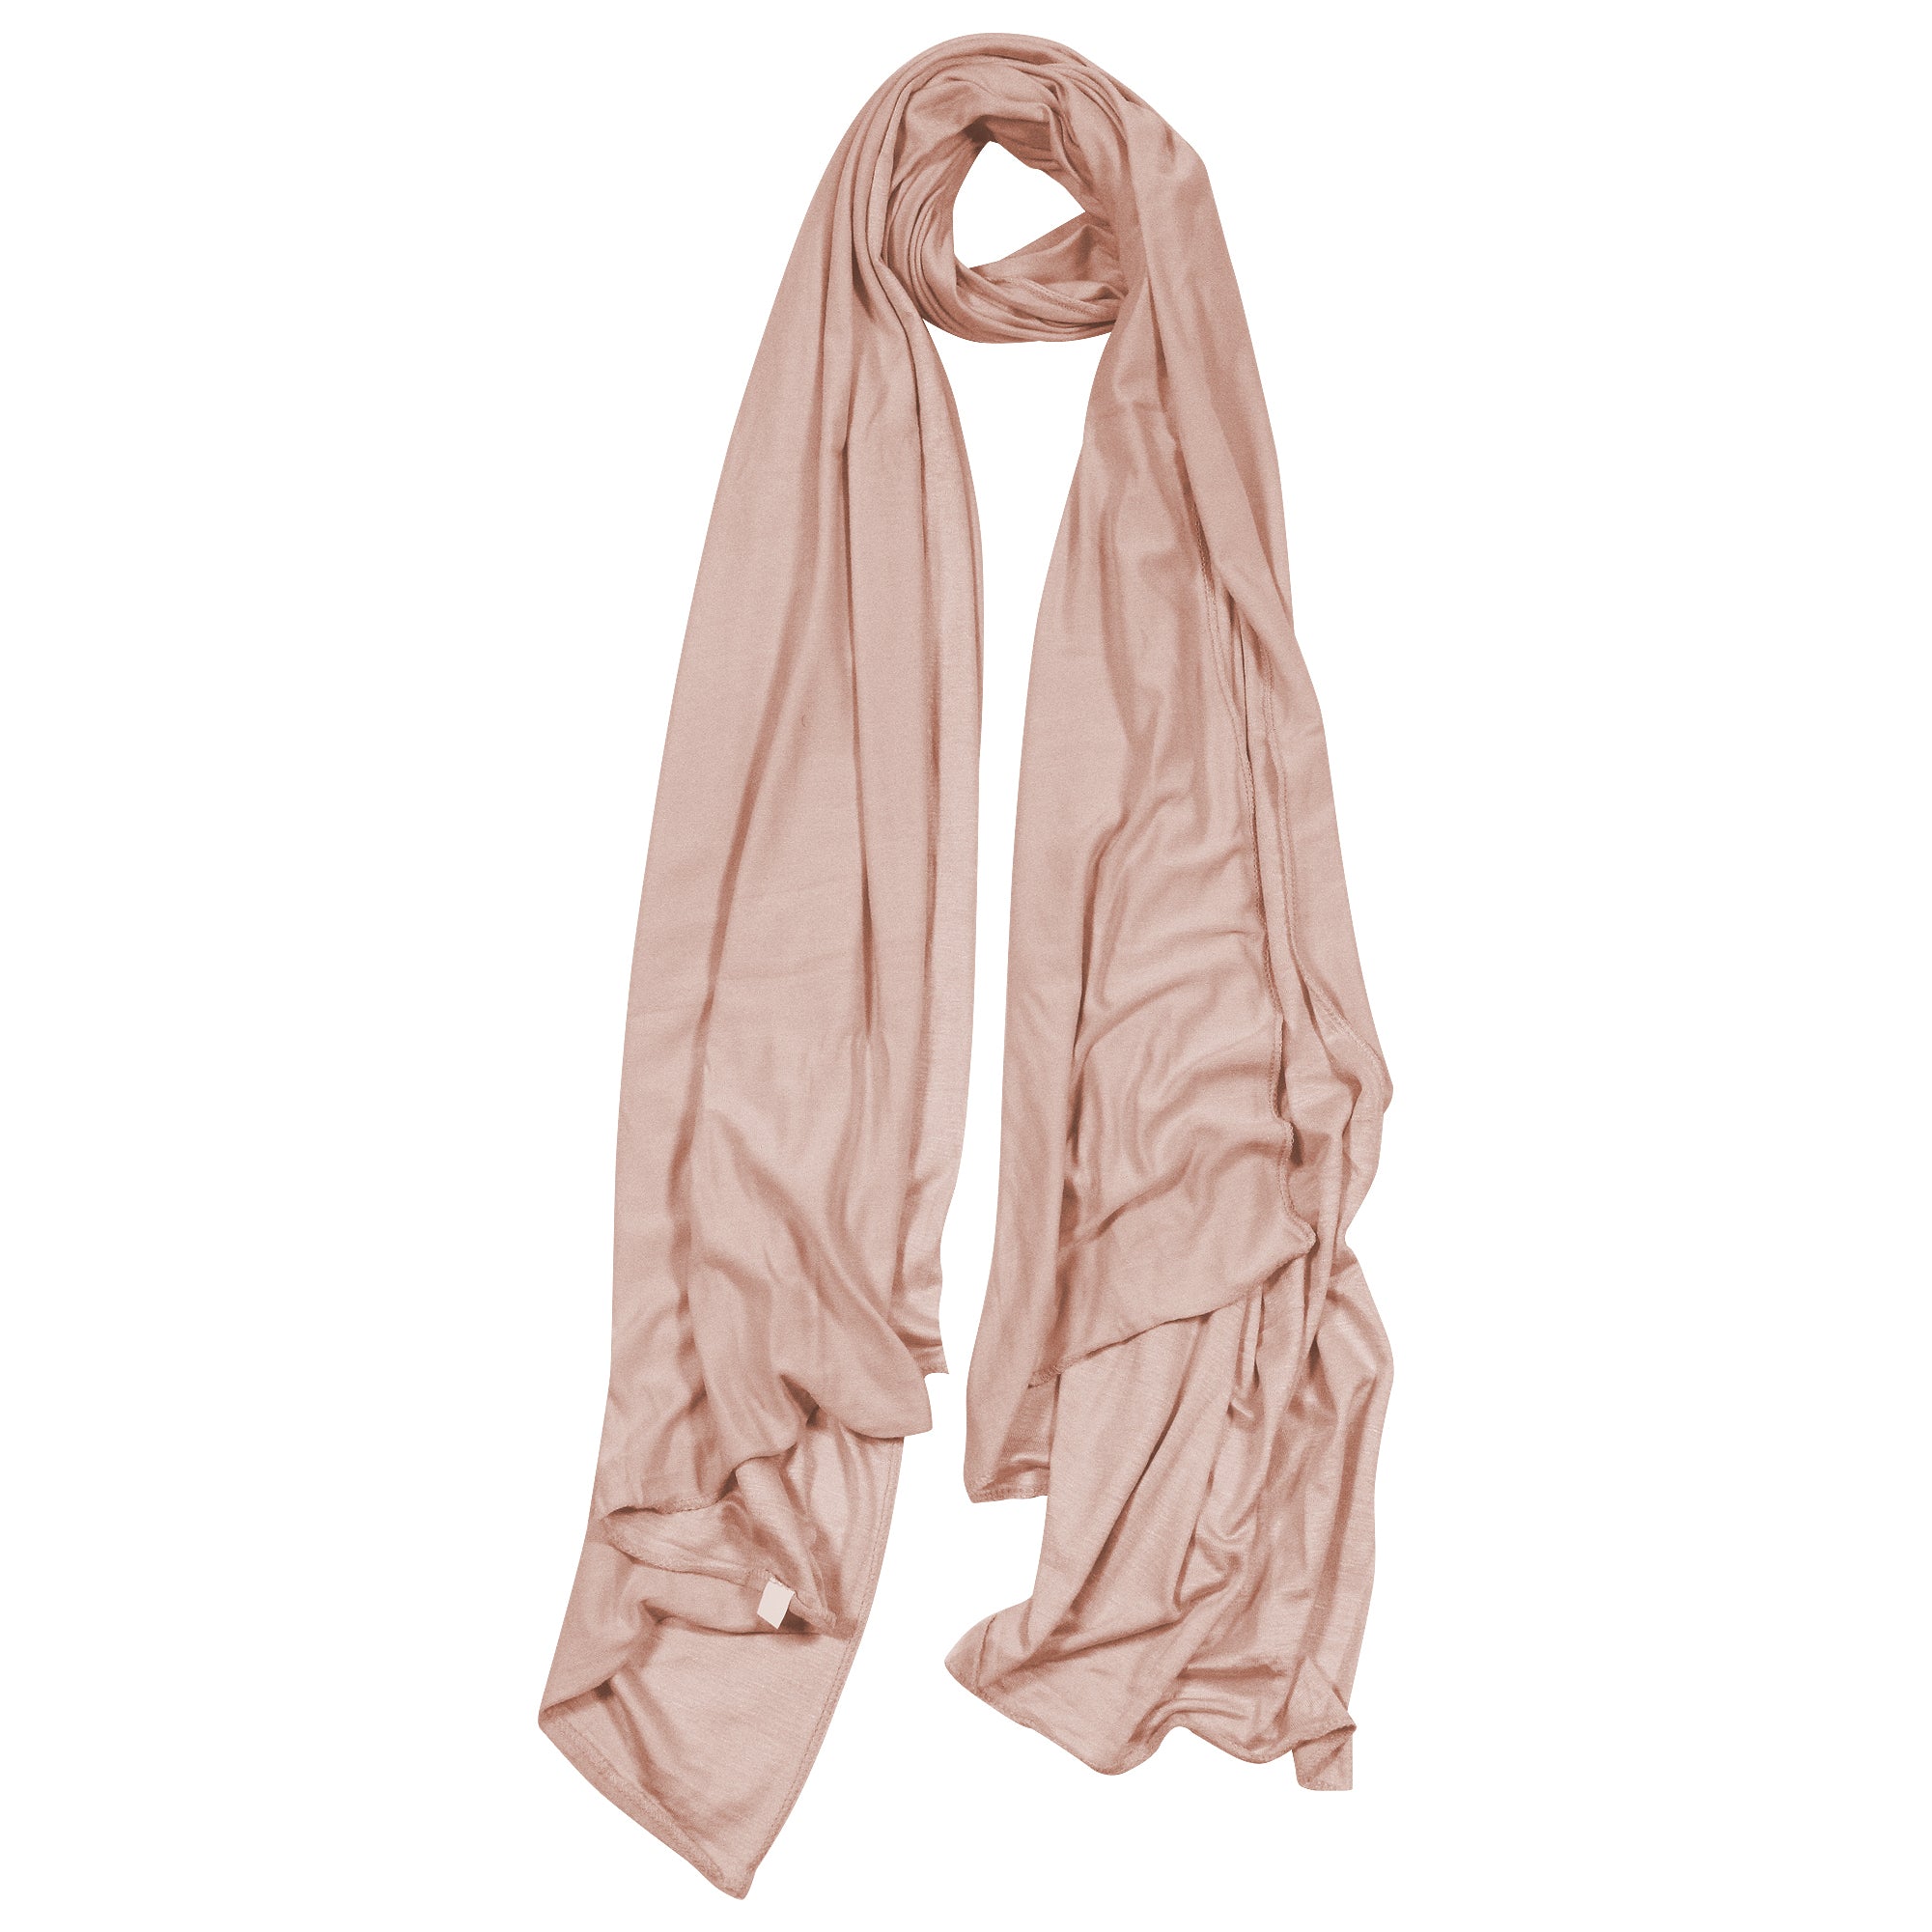 Women's Bisque Jersey Hijab ScarfFull Coverage at  Women's